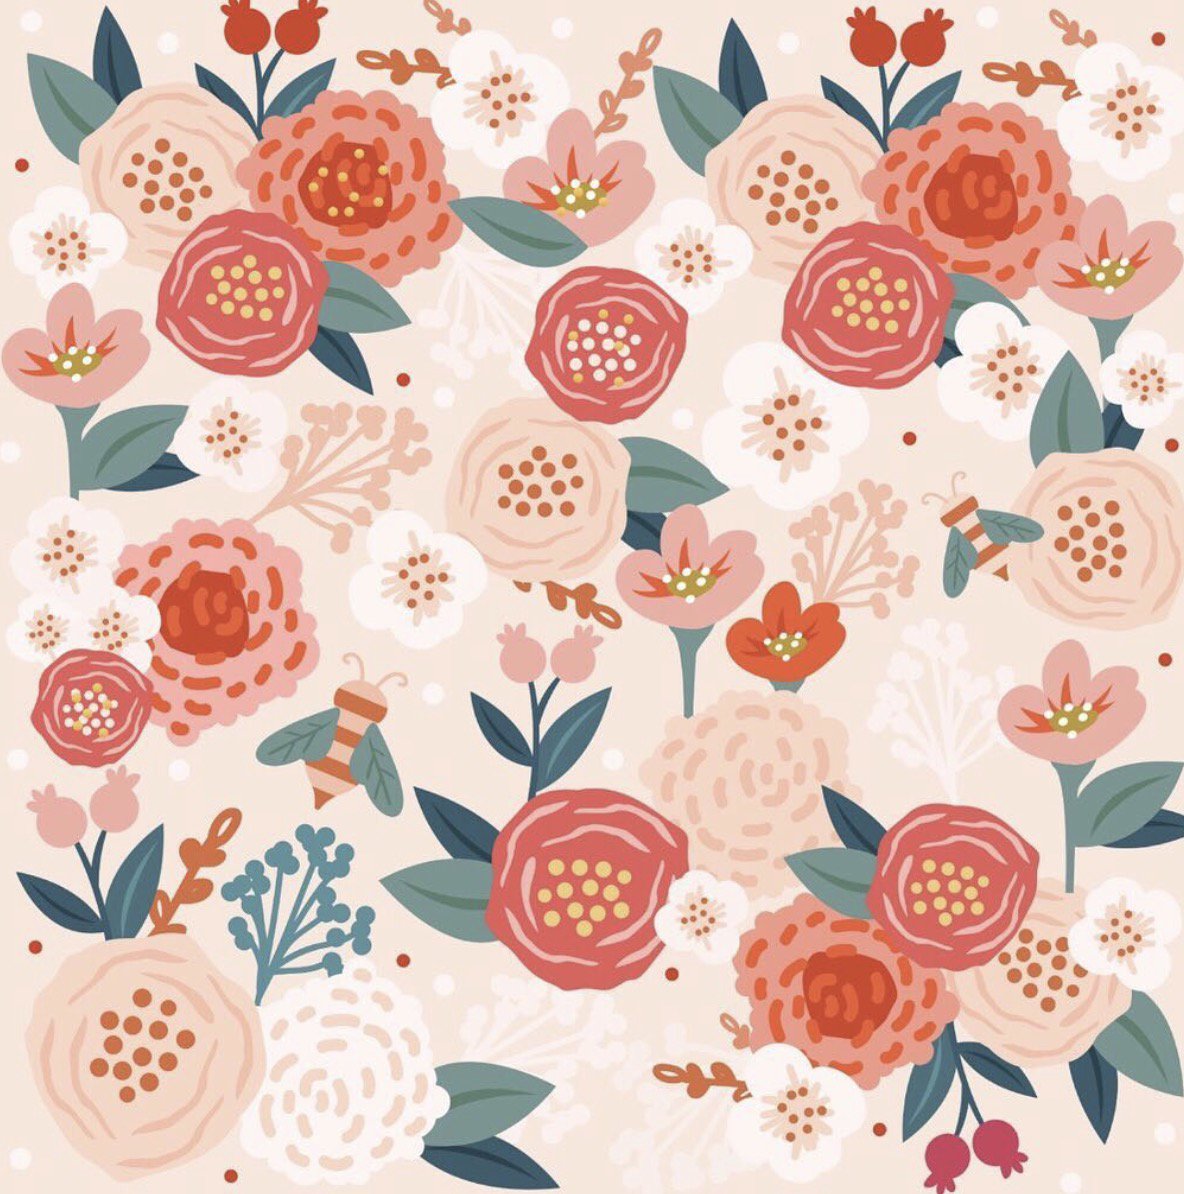 Bees & Bloom 🐝 + 🌺 <Shop the Collection> zazzle.com/collections/be…

#florals #floralpattern #flowerdesign #roses #rosepattern #colorfullife #colormehappy #happycolors #yourartspace #justdraw #drawoftheday #floraldesign #florallife #florallove #moodforfloral #flowerart #zazzle